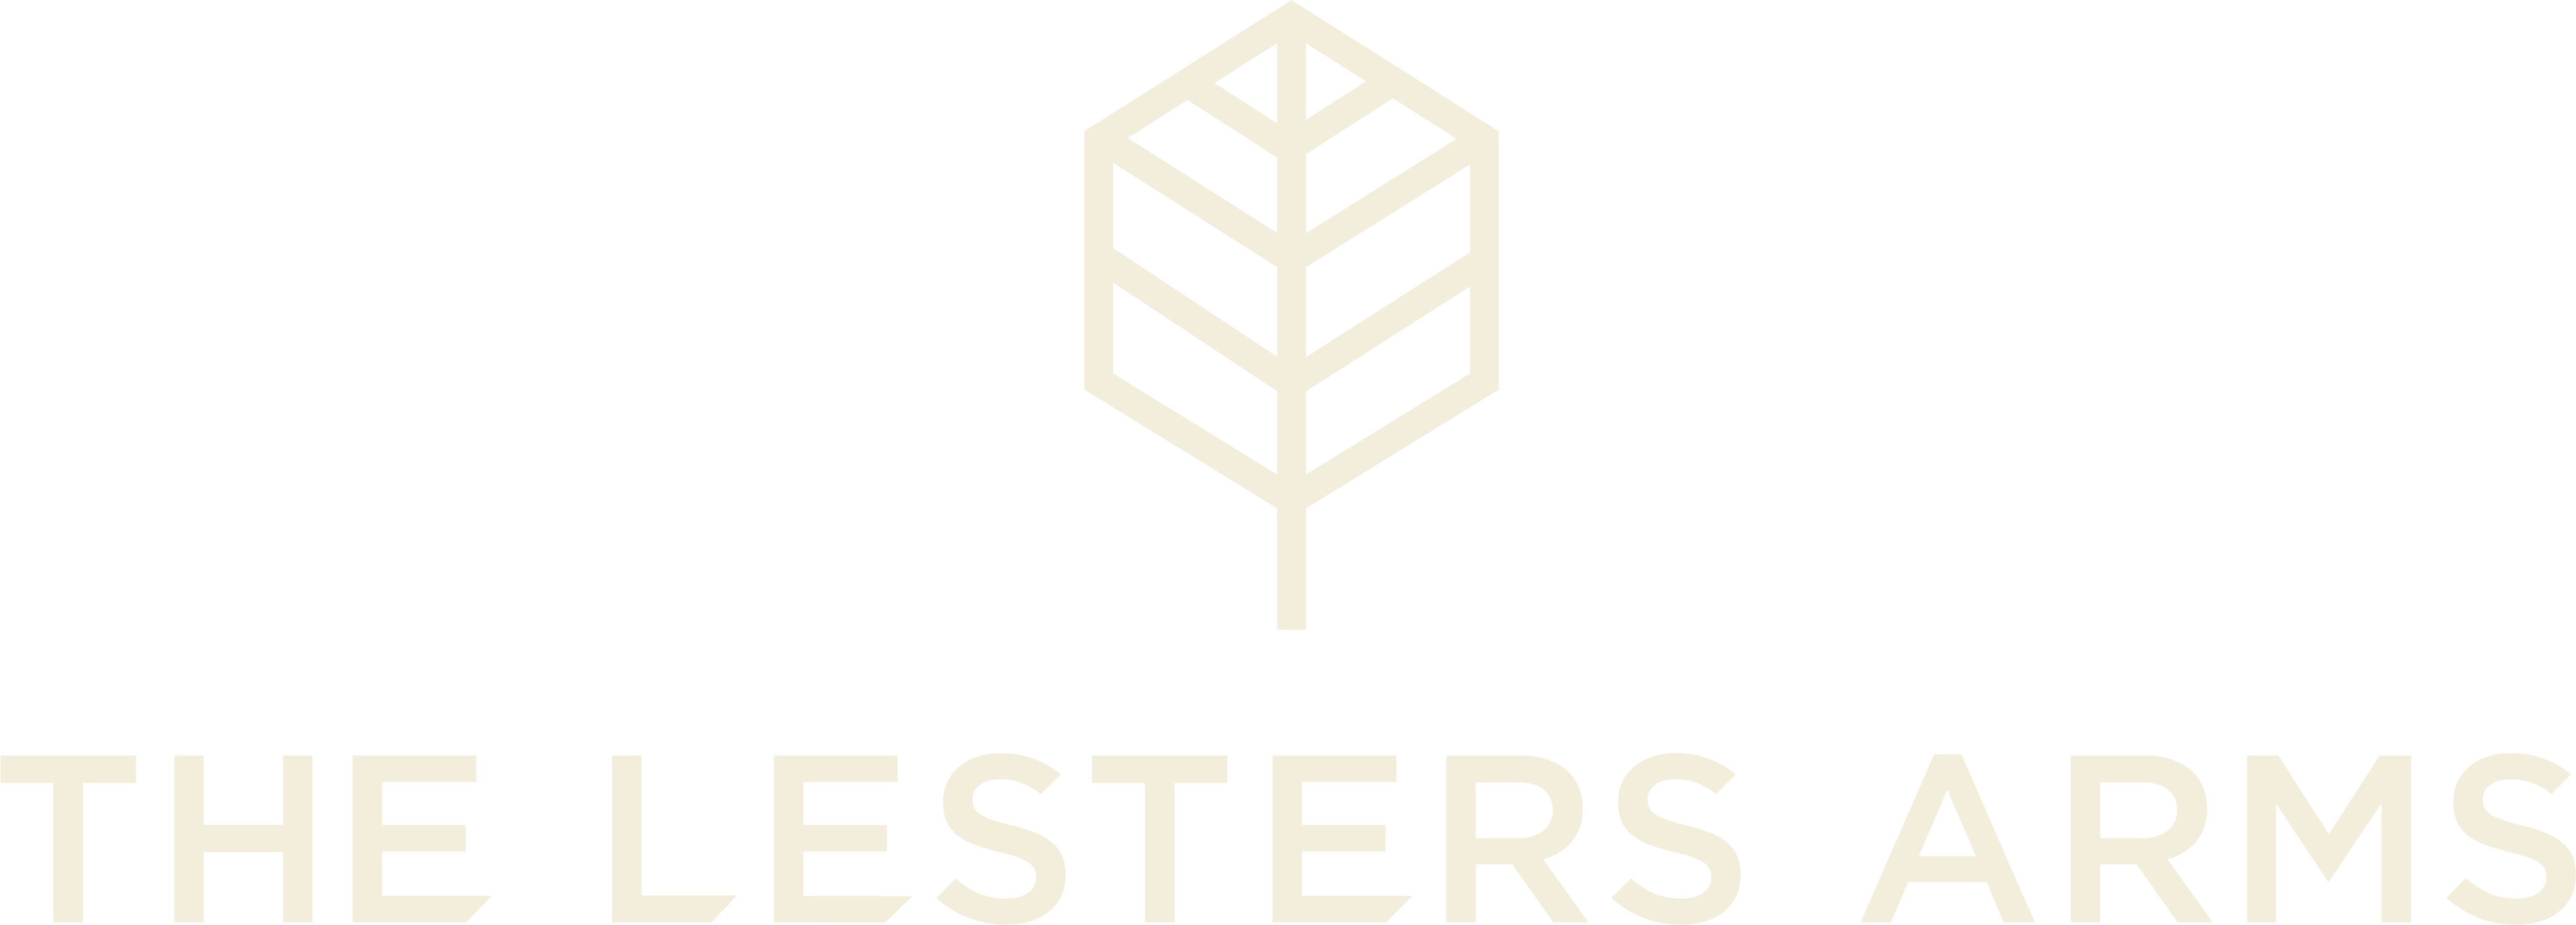 A picture of the Lesters Arms logo in Cream